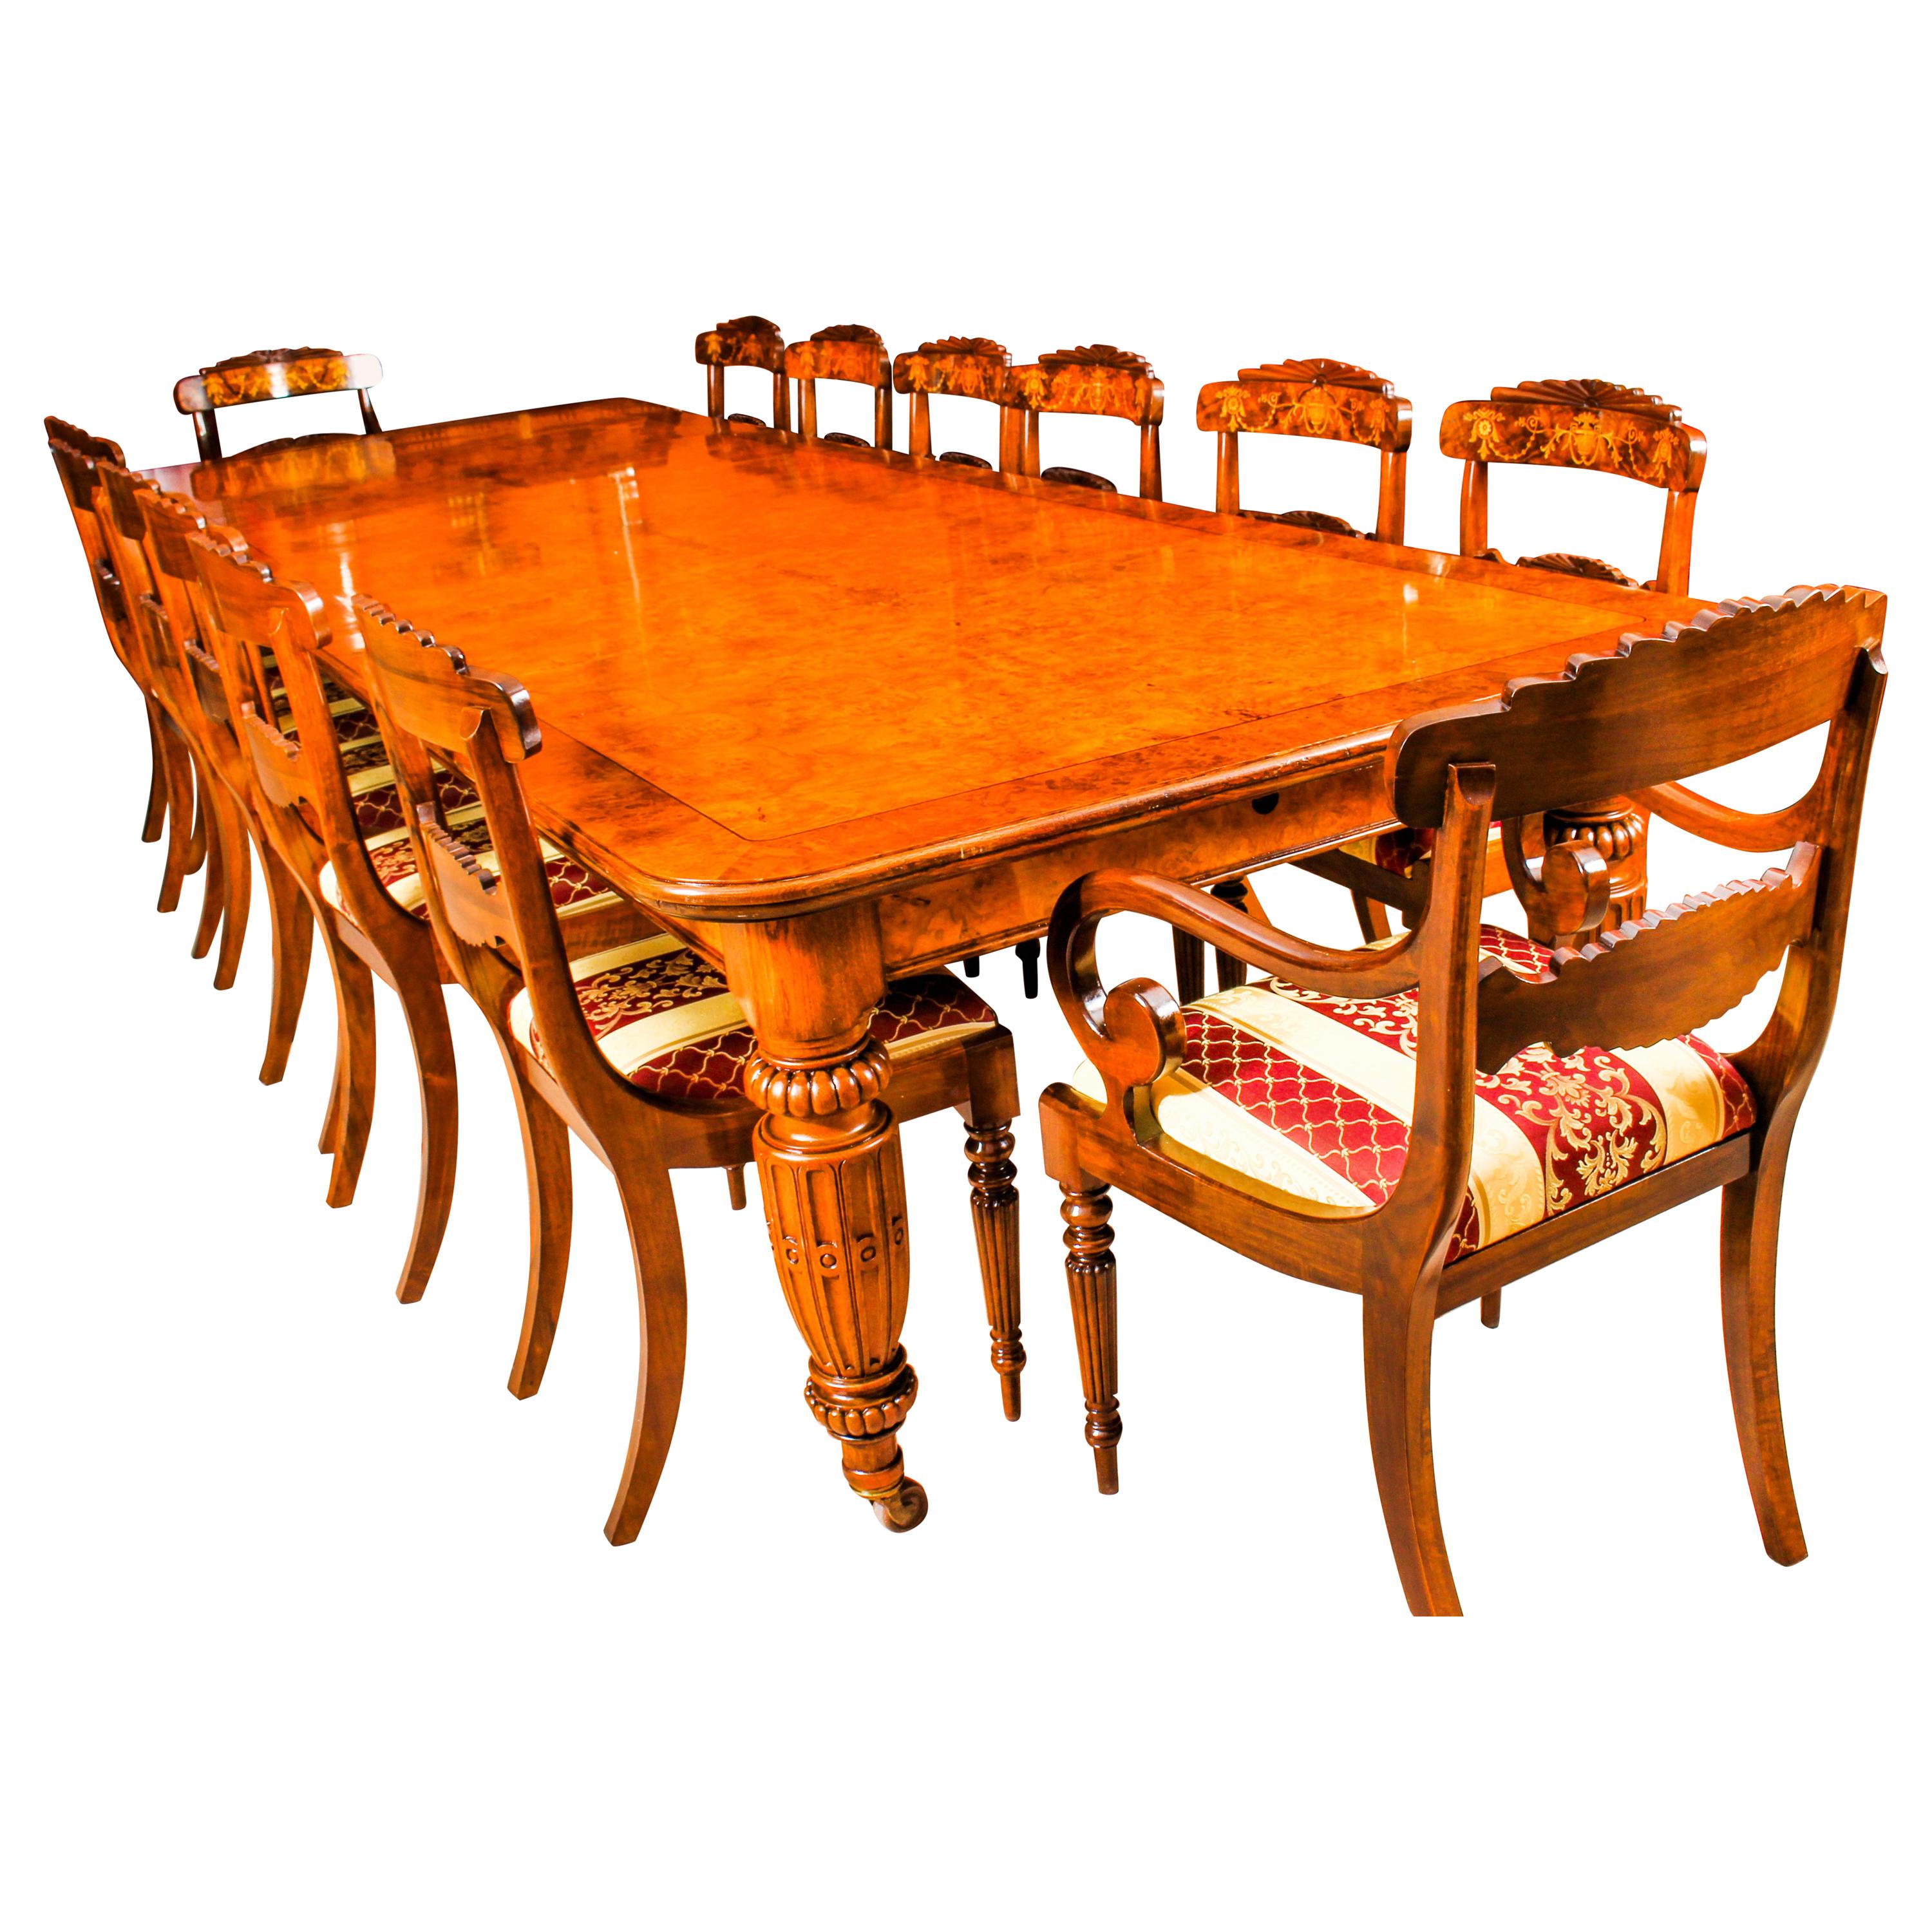 Antique Pollard Oak Victorian Extending Dining Table 19th Century and 12 Chairs